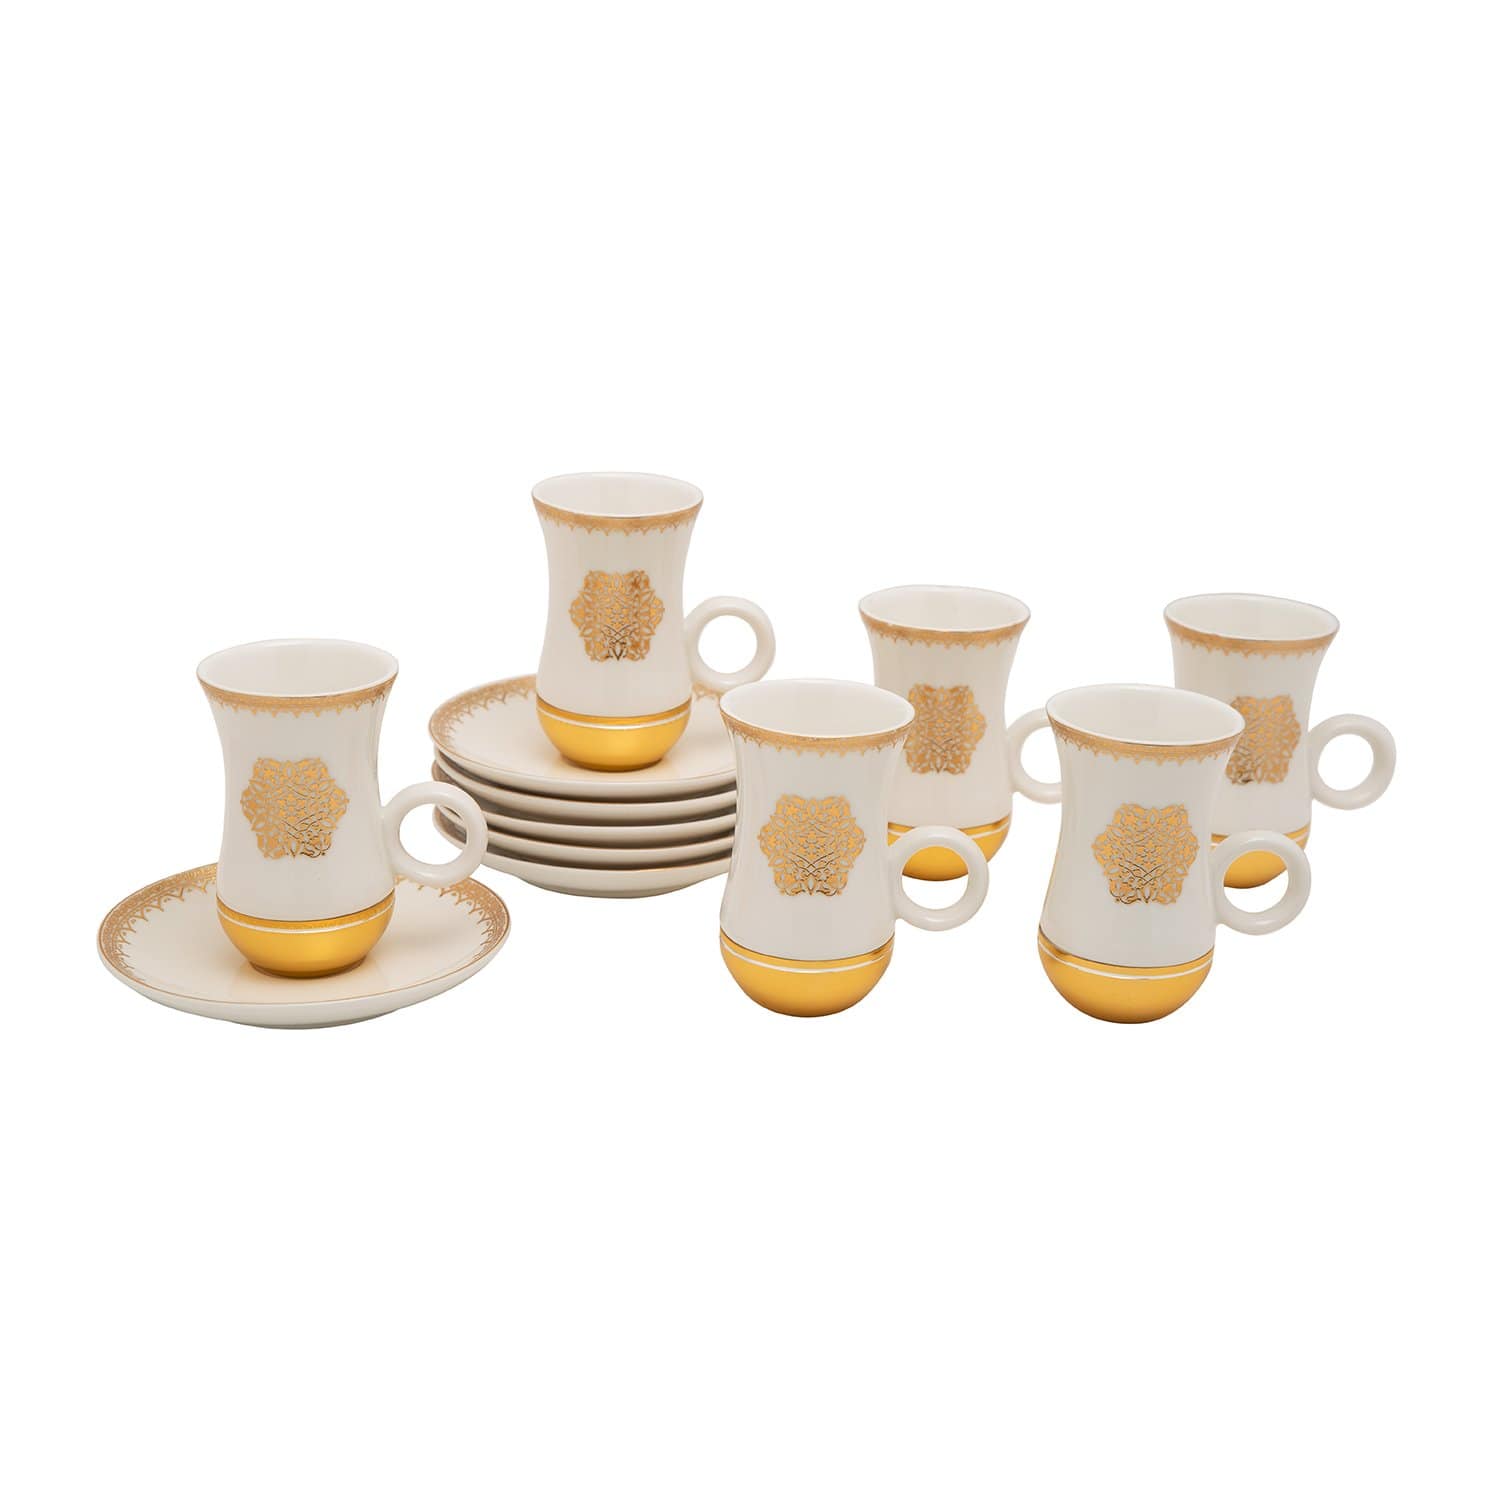 Amber Porcelain Larisa Istikan Cup Set - Gold and White, 12 Pieces - AM3373-S28/026/12PC